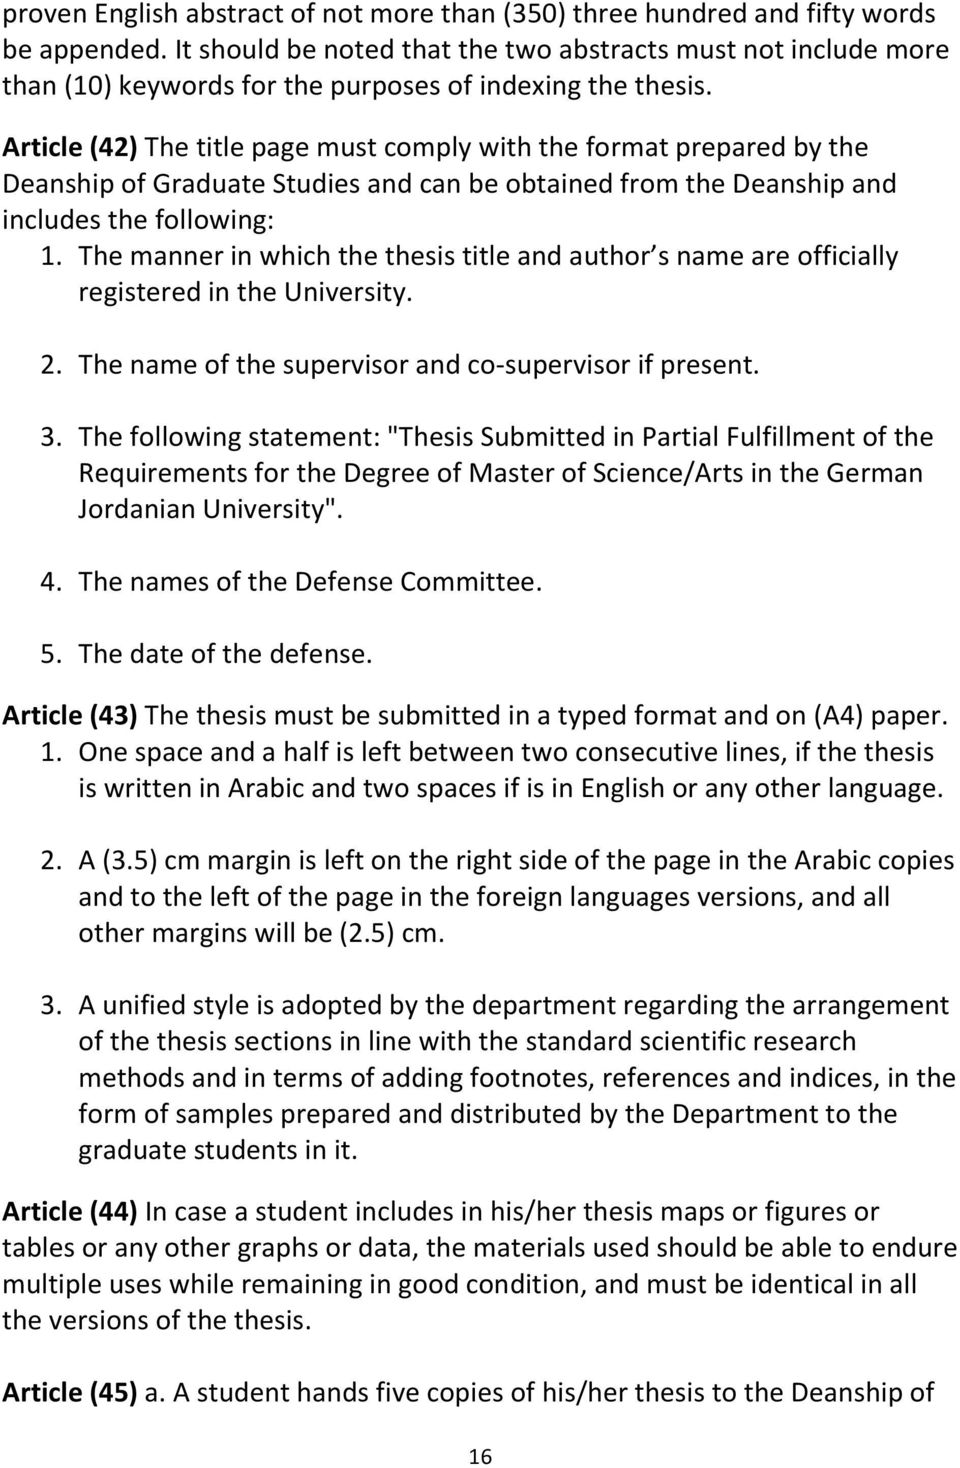 Article (42) The title page must comply with the format prepared by the Deanship of Graduate Studies and can be obtained from the Deanship and includes the following: 1.